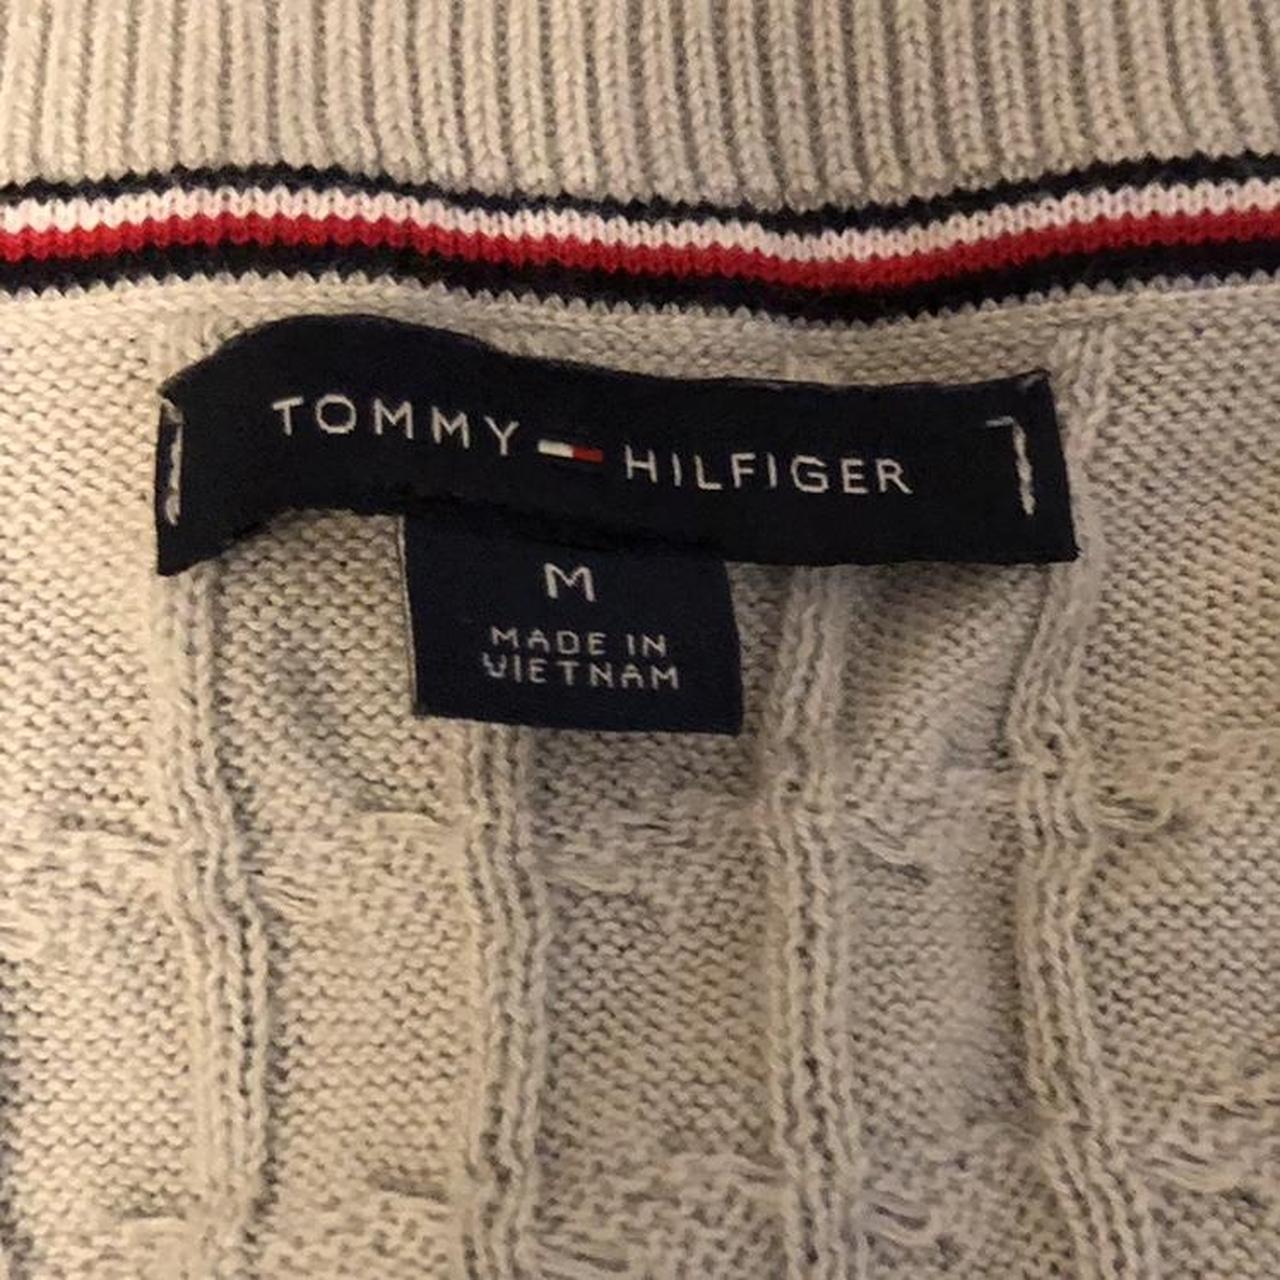 Tommy Hilfiger grey sweater - Never worn, tags... - Depop